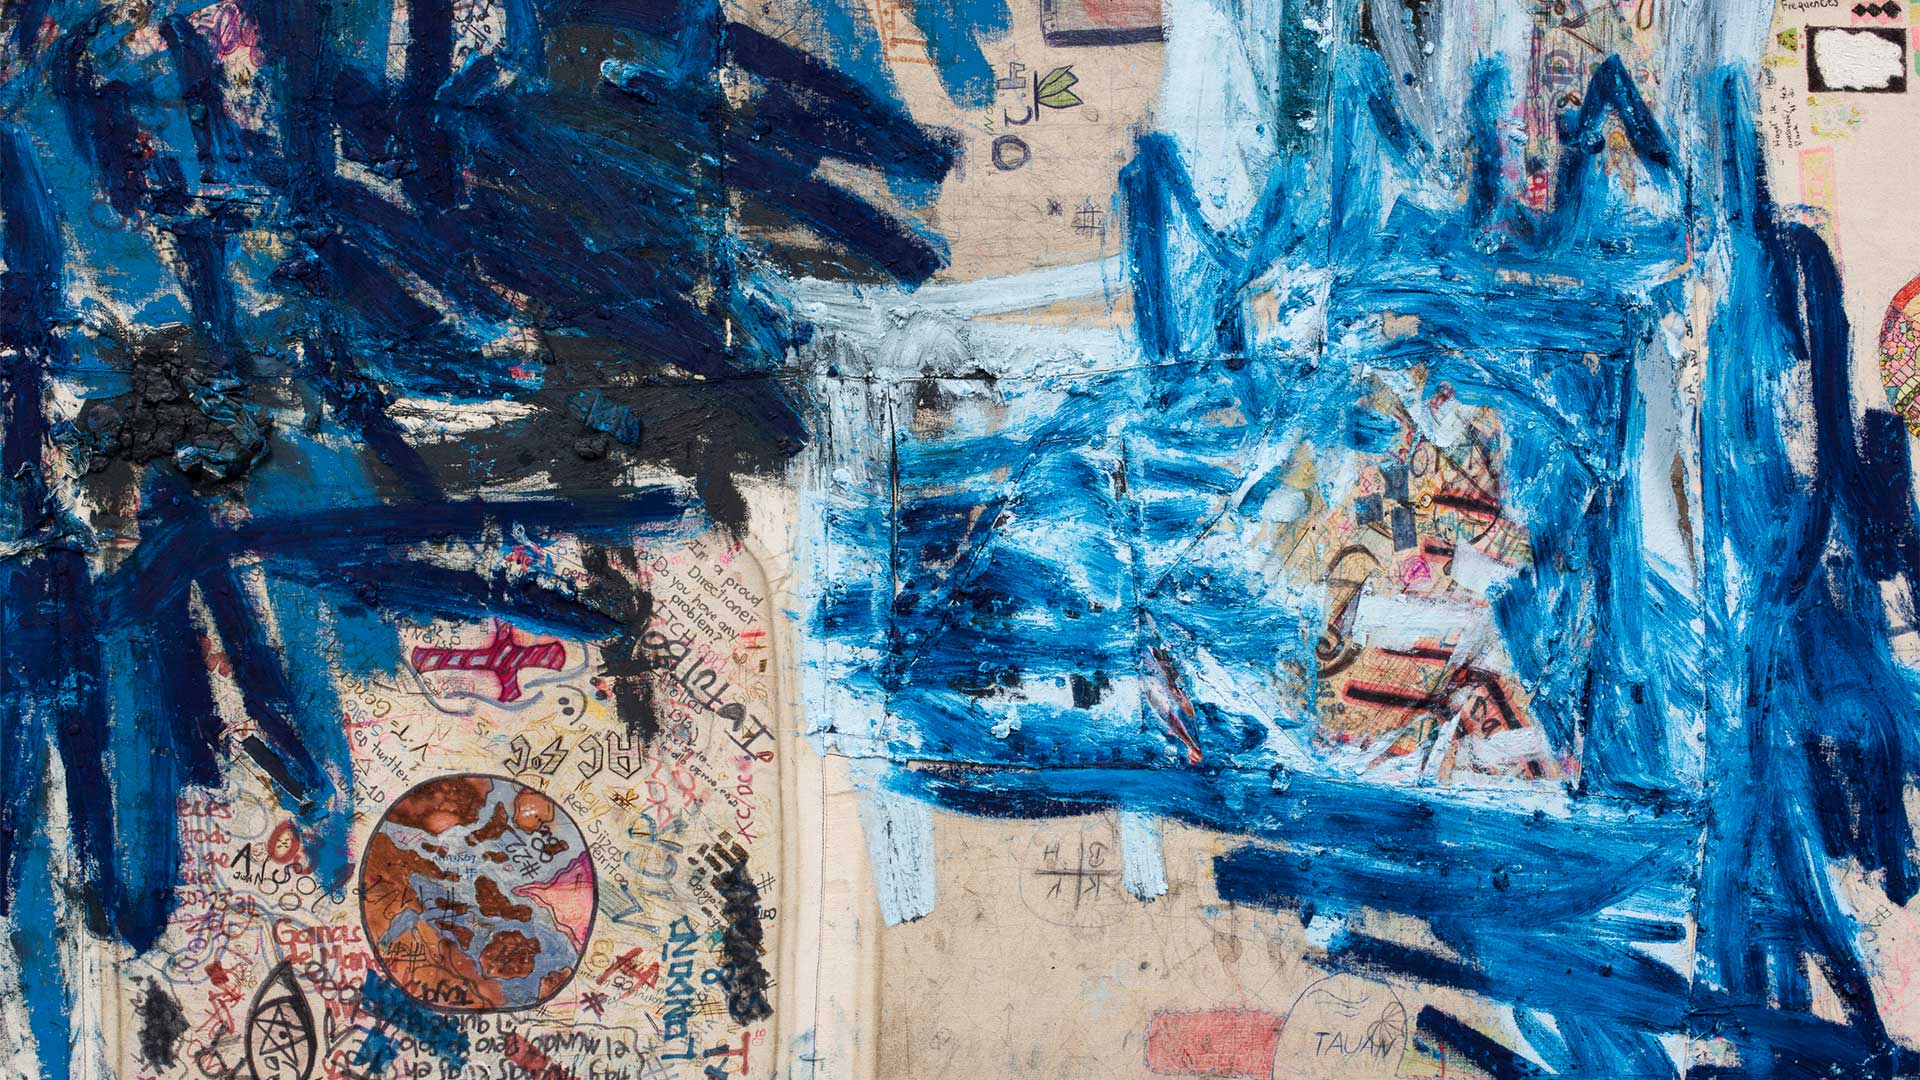 A detail of a painting by Oscar Murillo, titled disrupted frequencies (Colombia, Brazil, Turkey, China), dated 2013–2019.